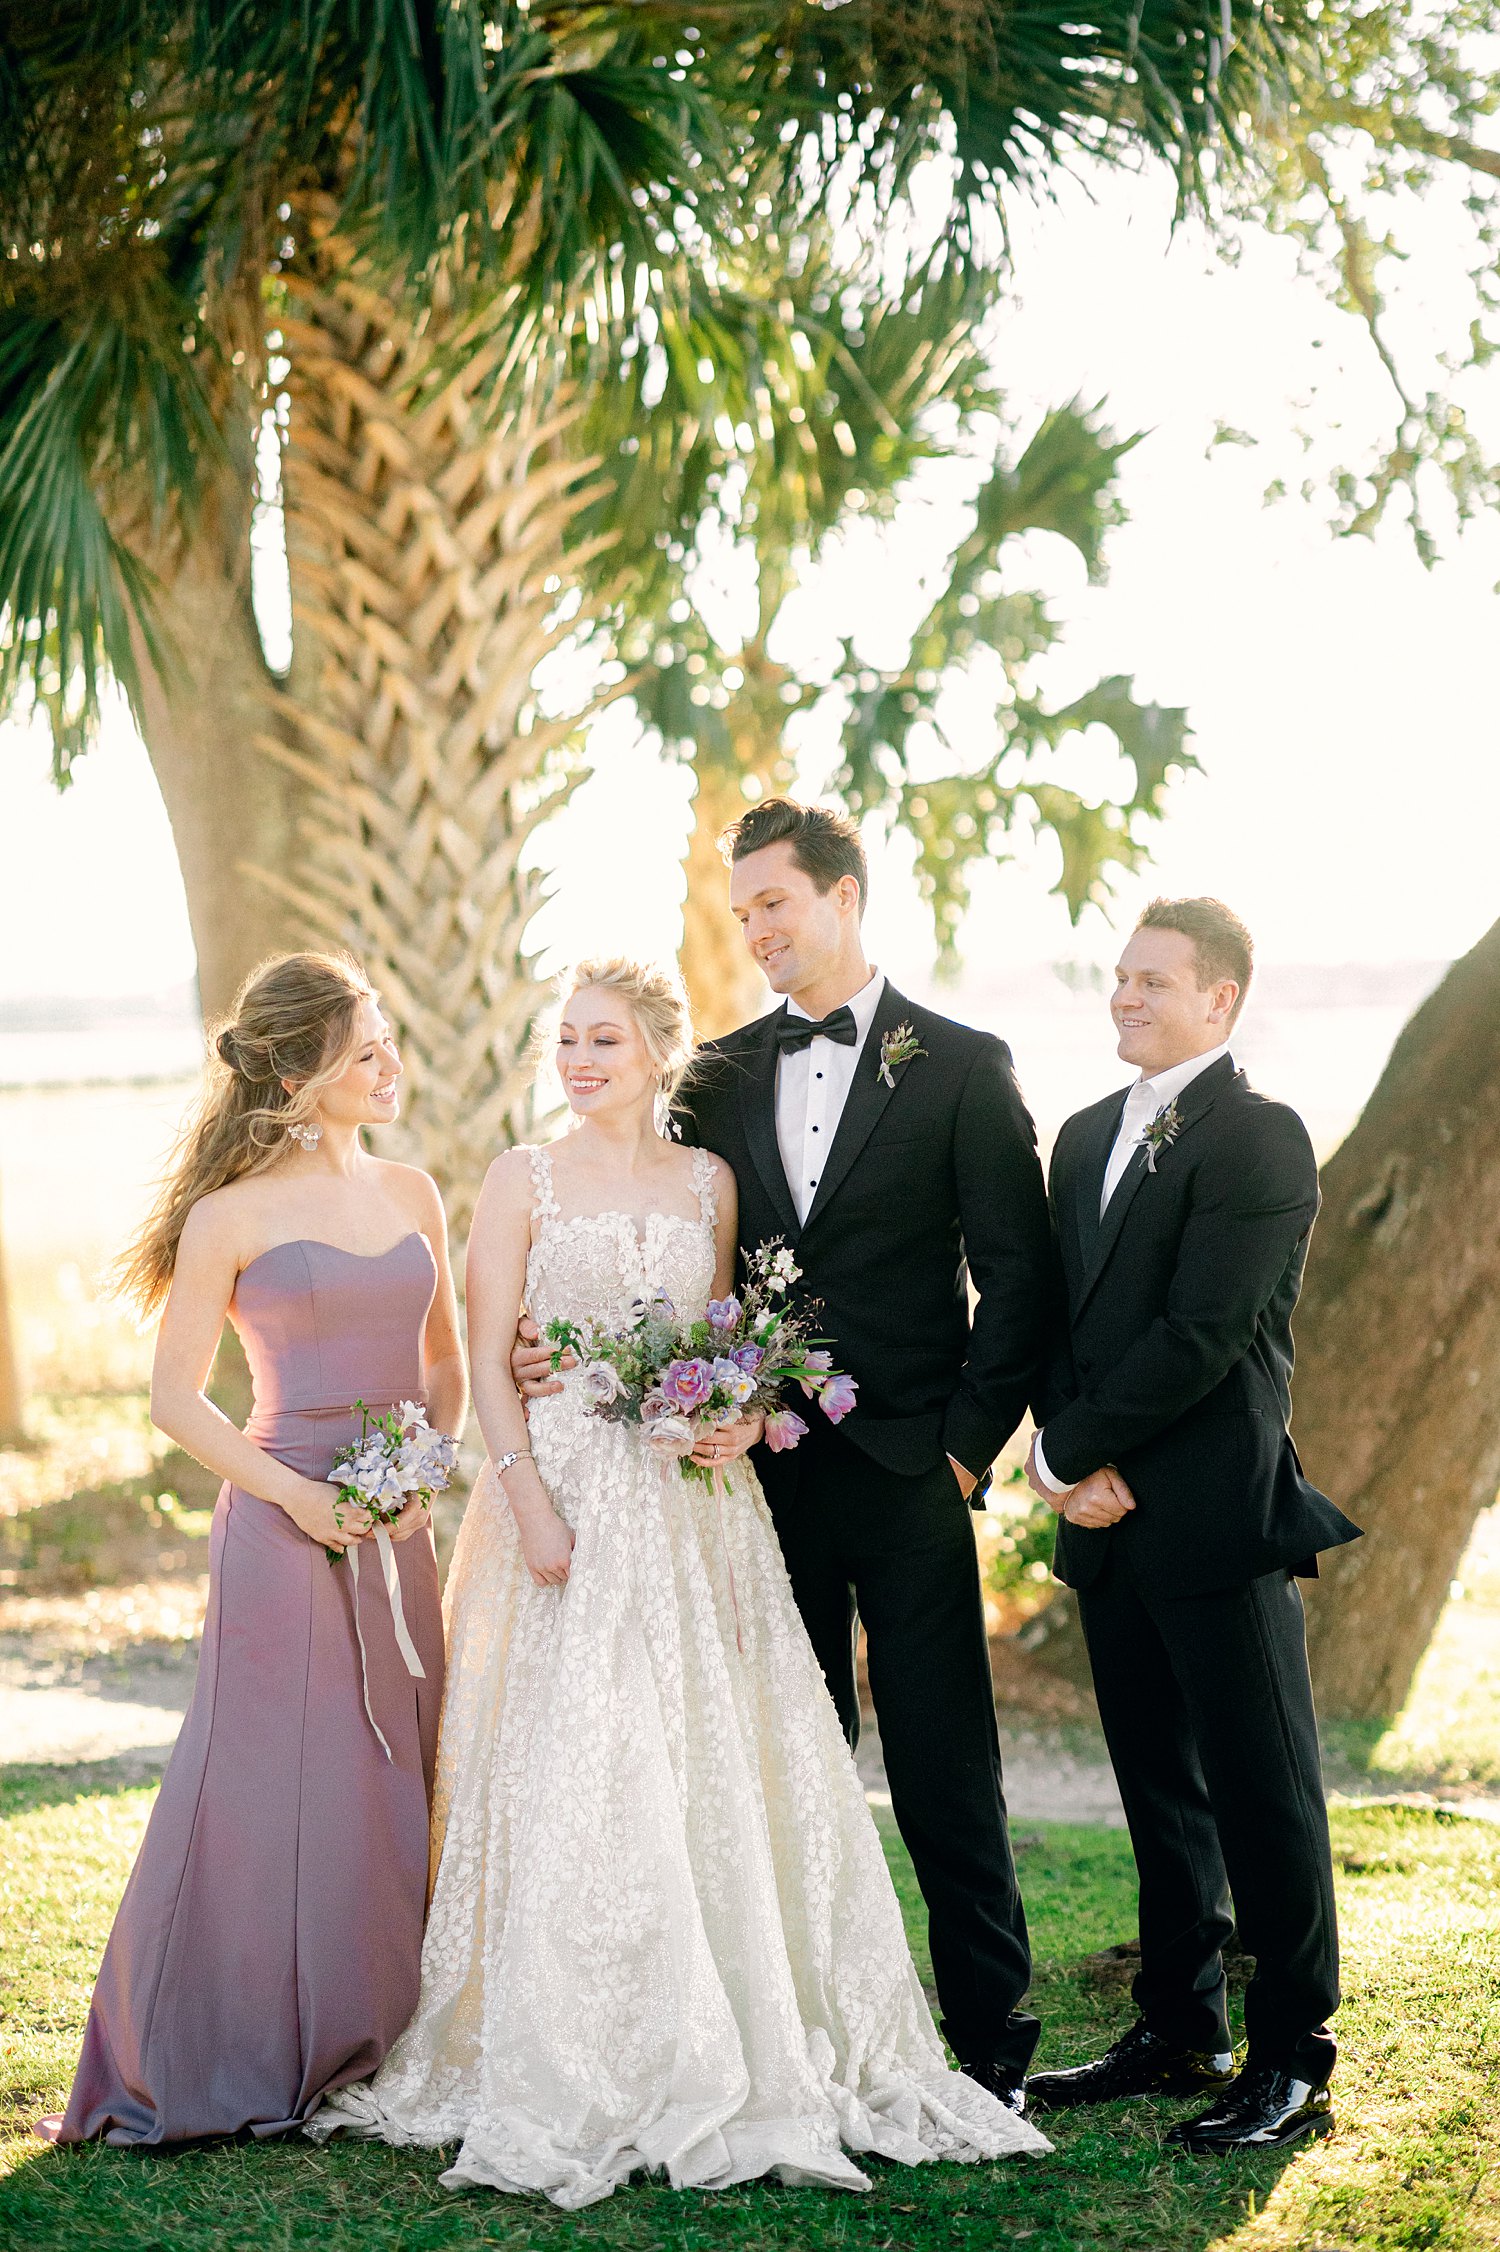 Bride and groom with maid of honor and best man by trees outside wedding